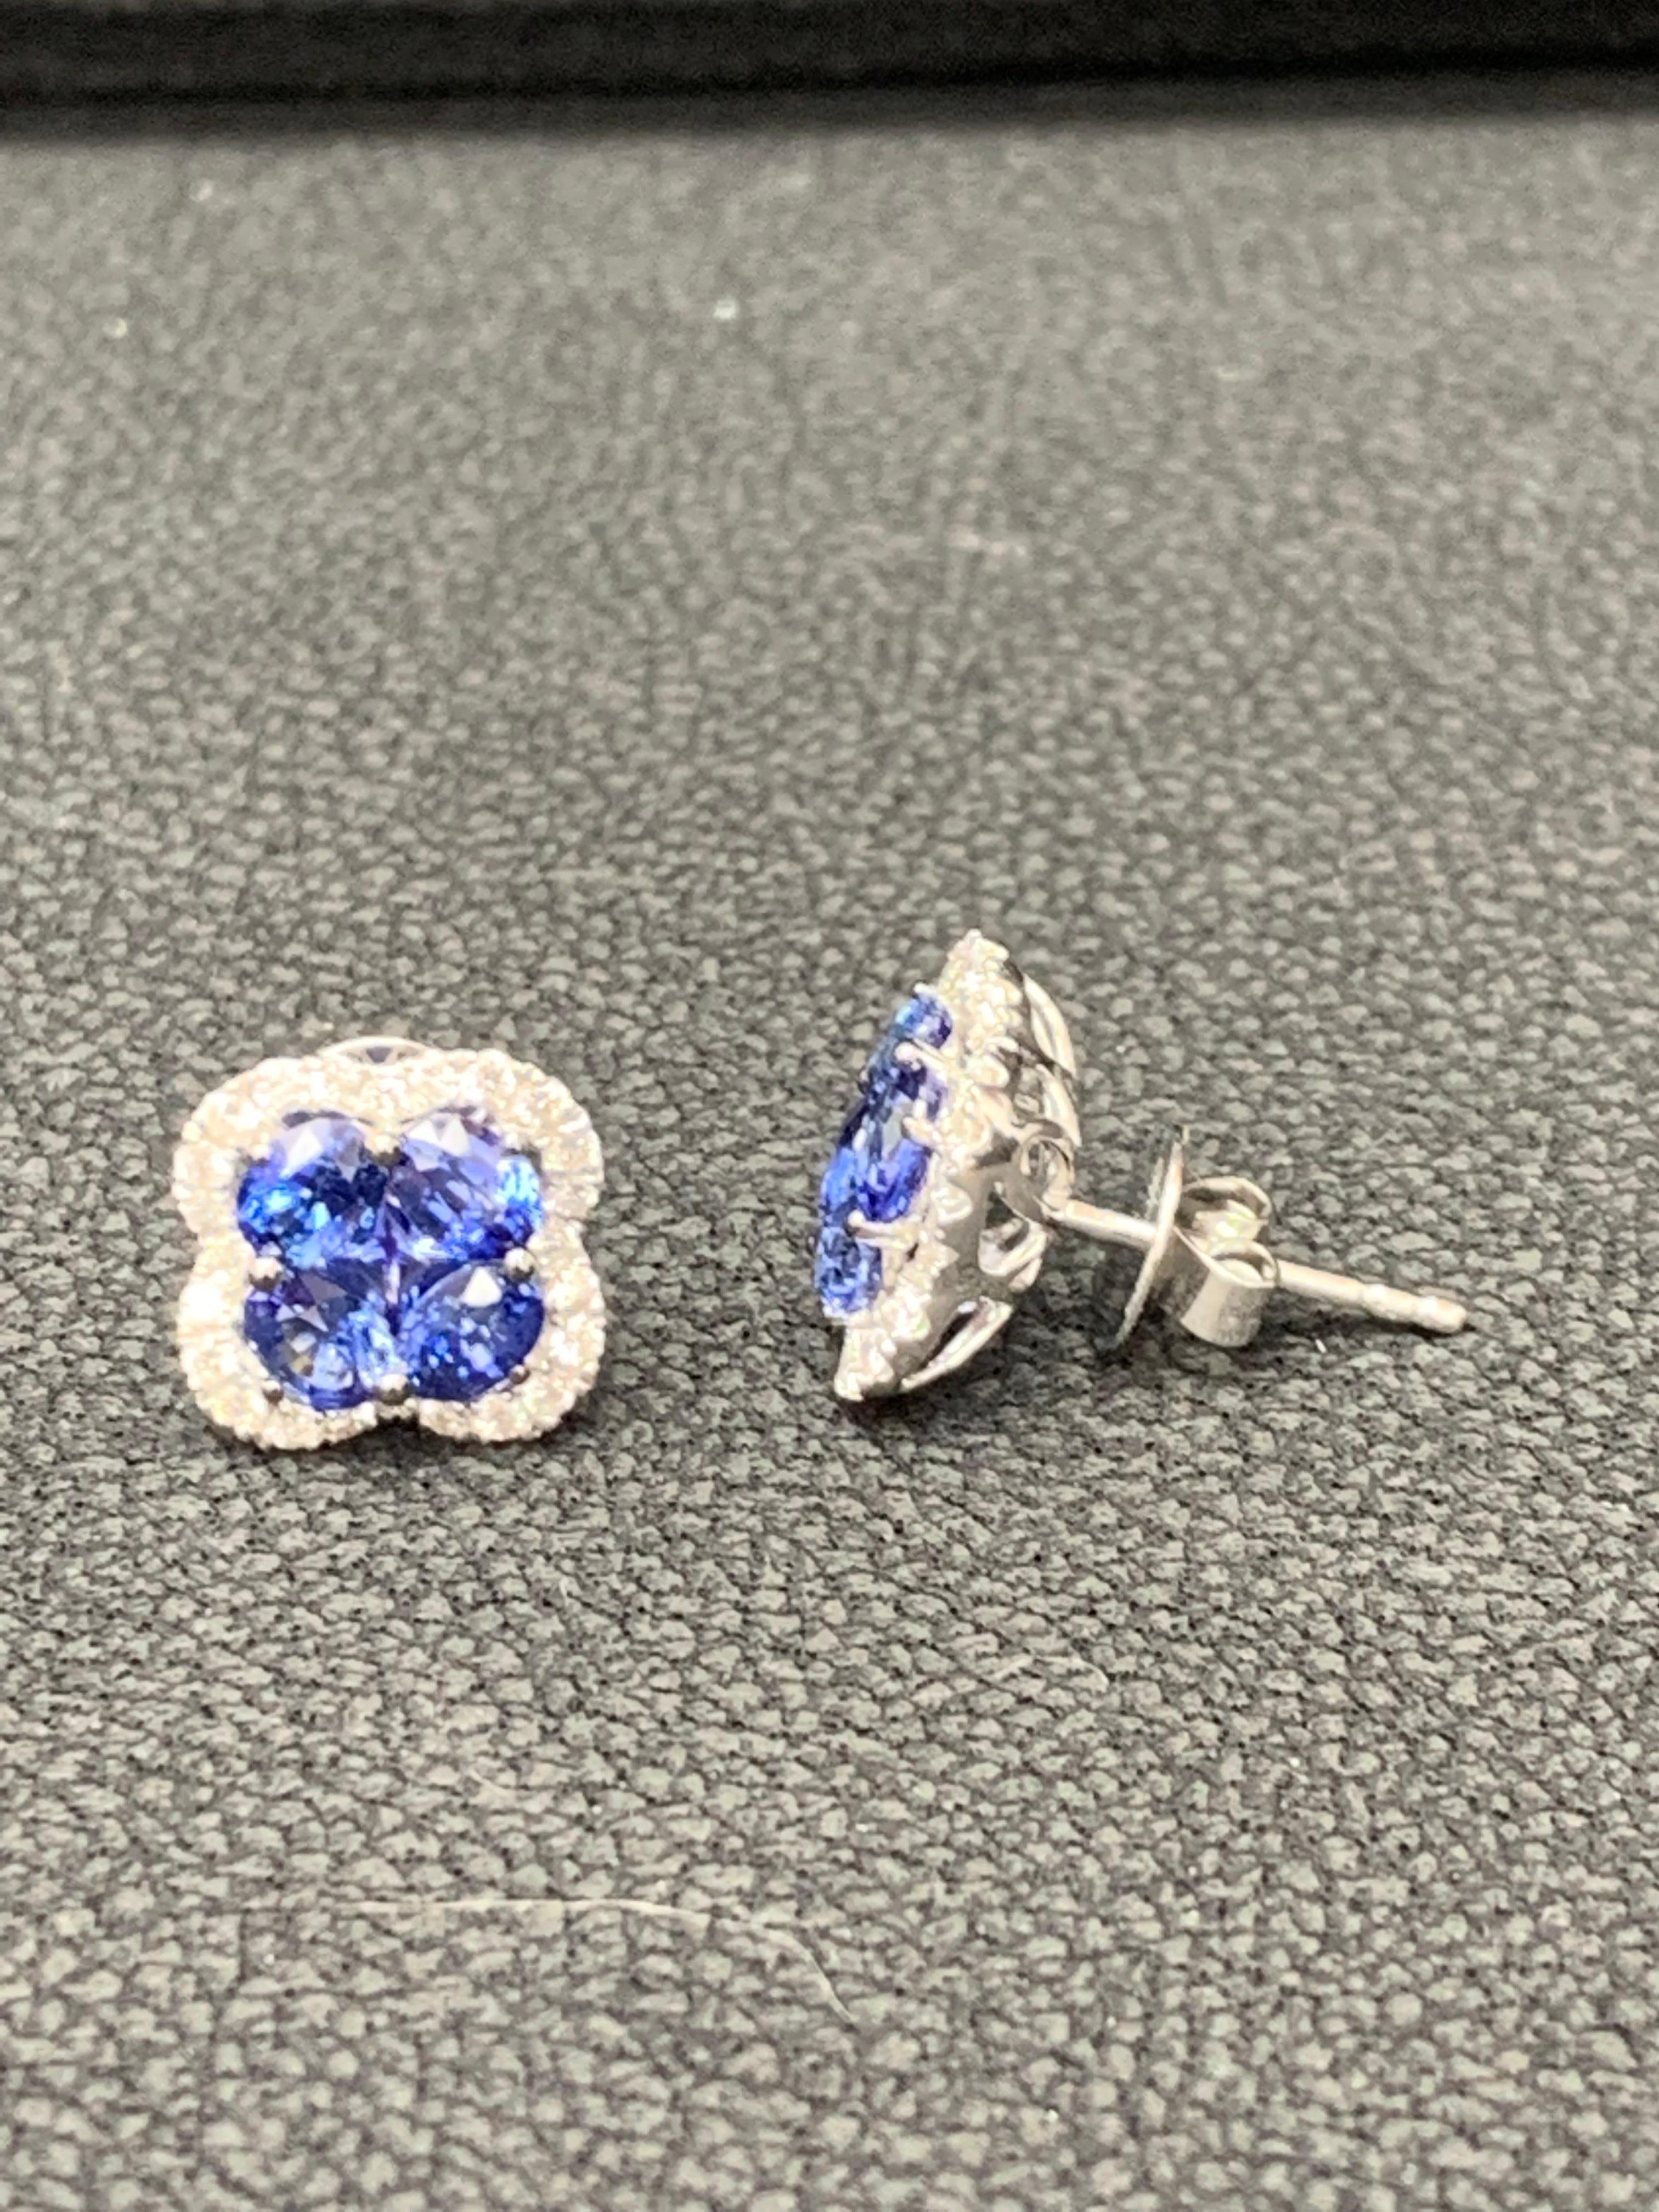 Contemporary 1.85 Carat Oval Cut Blue Sapphire and Diamond Stud Earrings in 18K White Gold For Sale